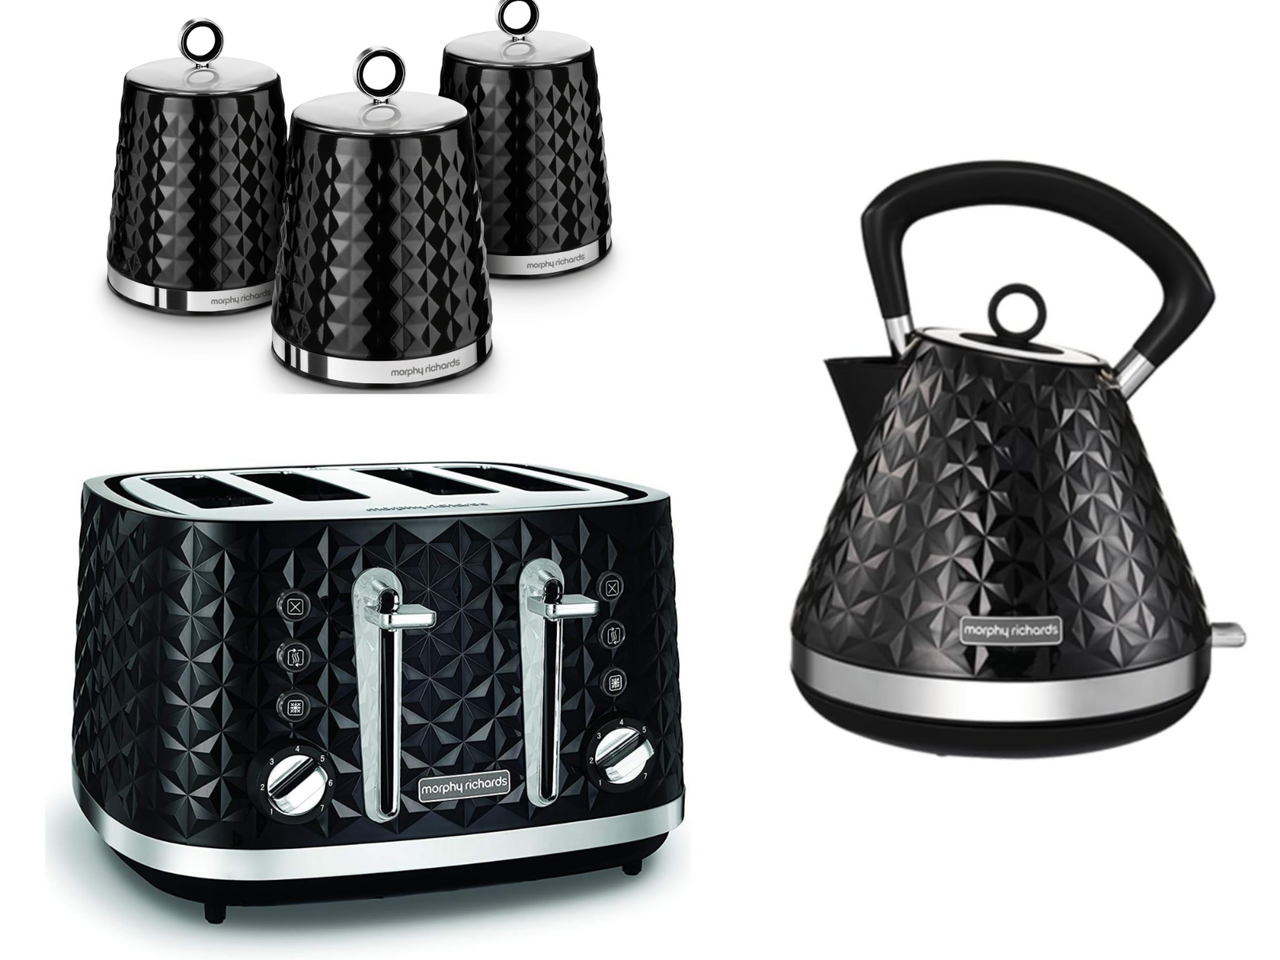 Morphy Richards Black Vector 1.5L 3KW Pyramid Kettle, 4 Slice Toaster & Dimensions Canisters Matching Kitchen Set